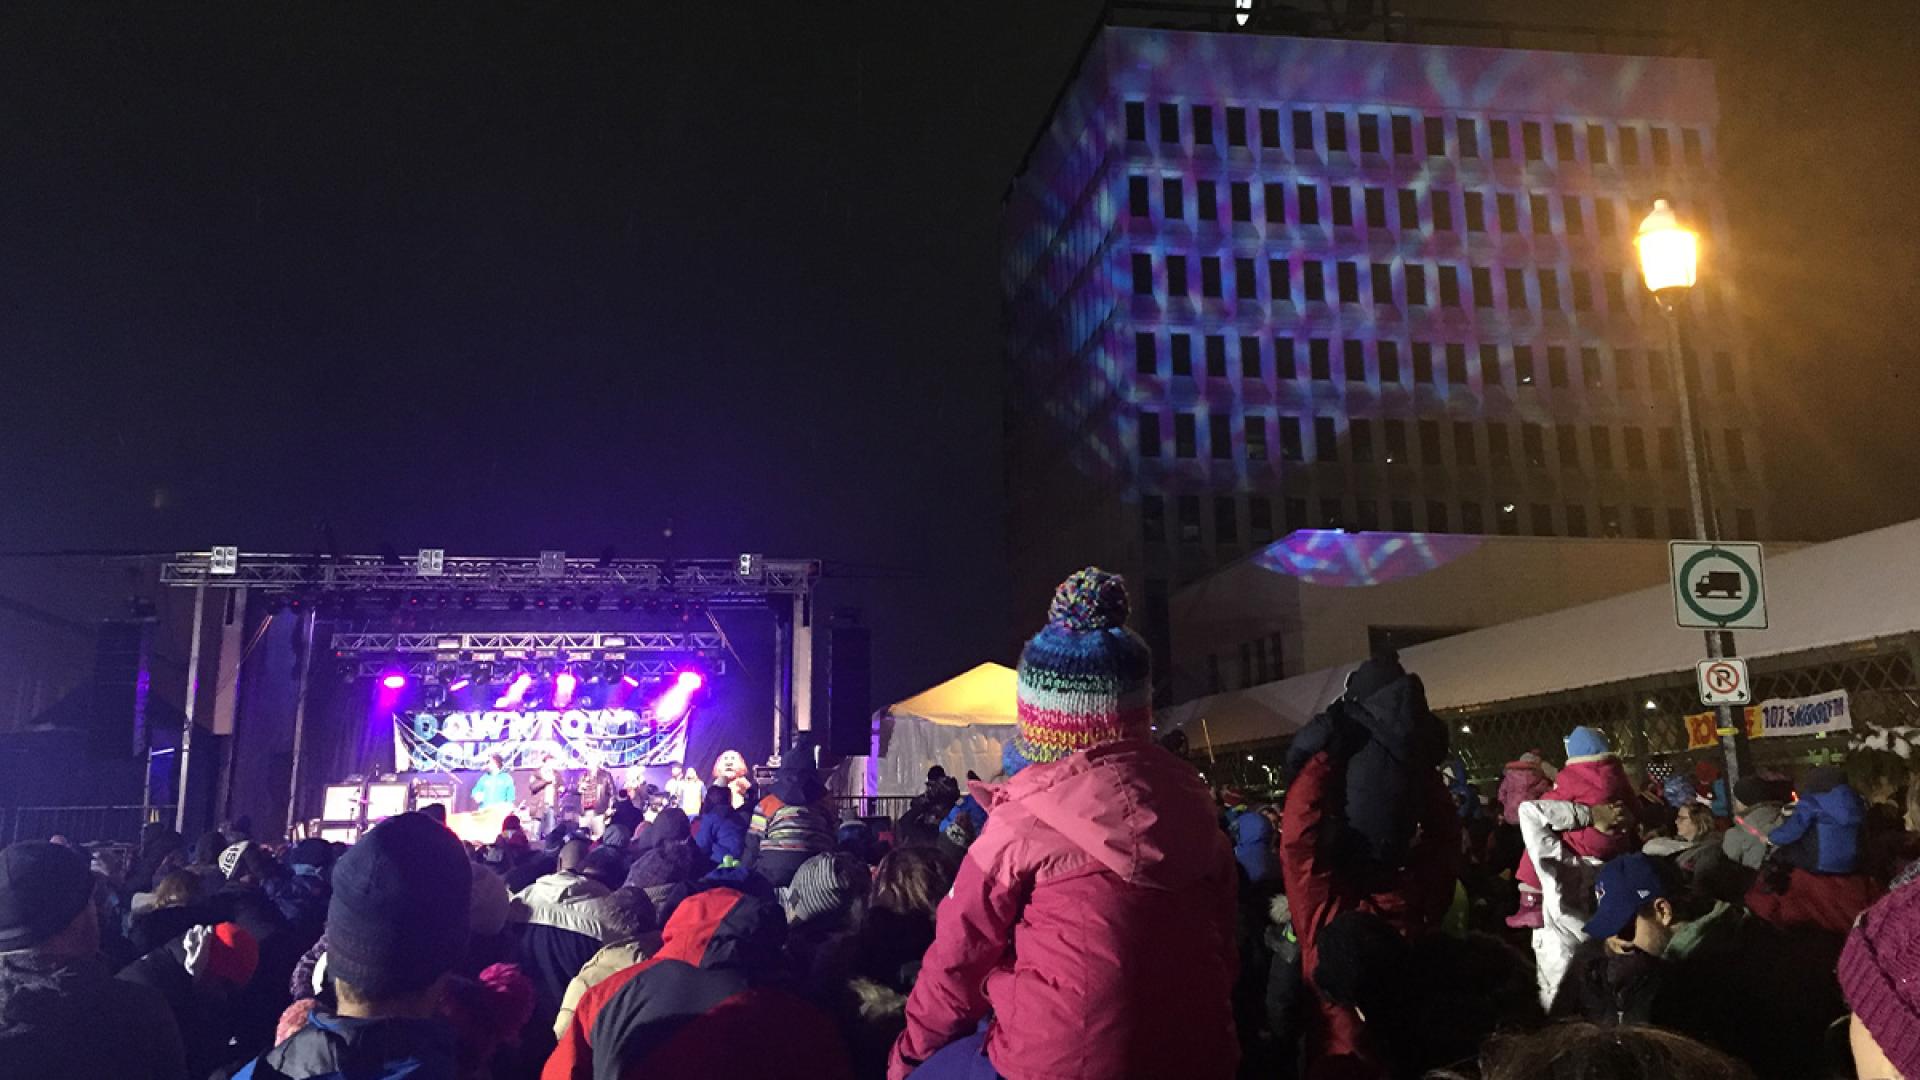 crowd watching concert at night with Barrie City Hall in background